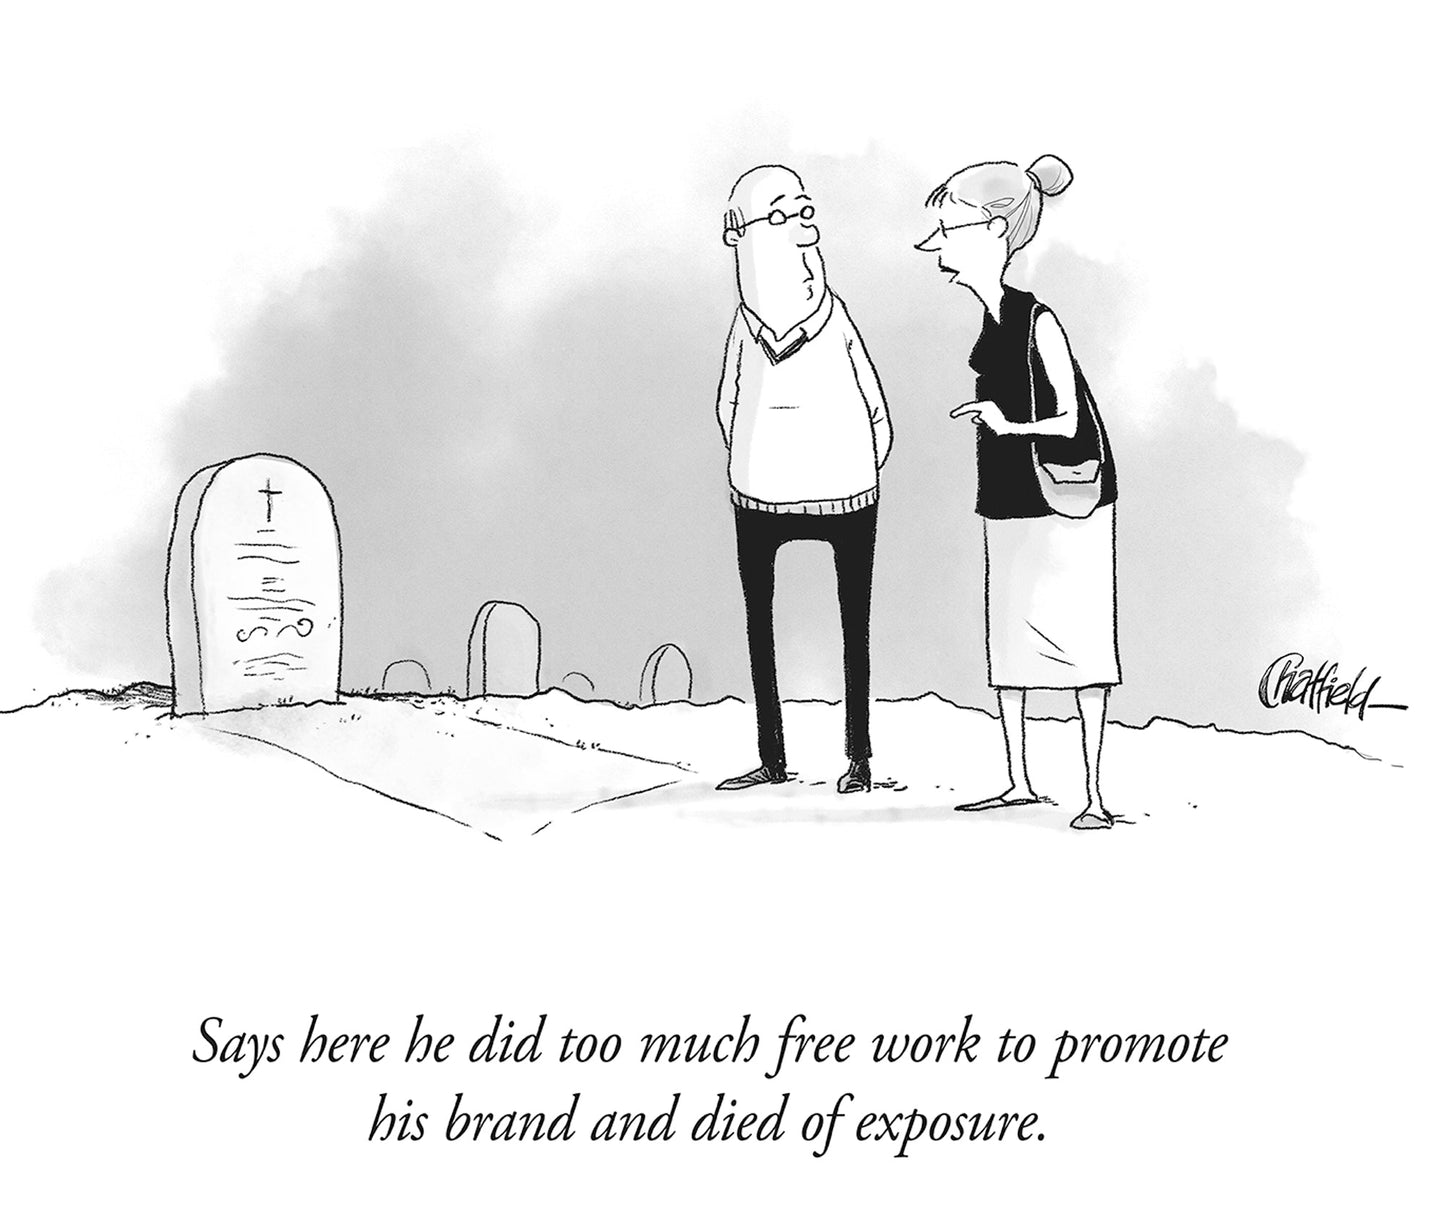 Says here he did too much free work to promote his brand and died of exposure. - Jason Chatfield